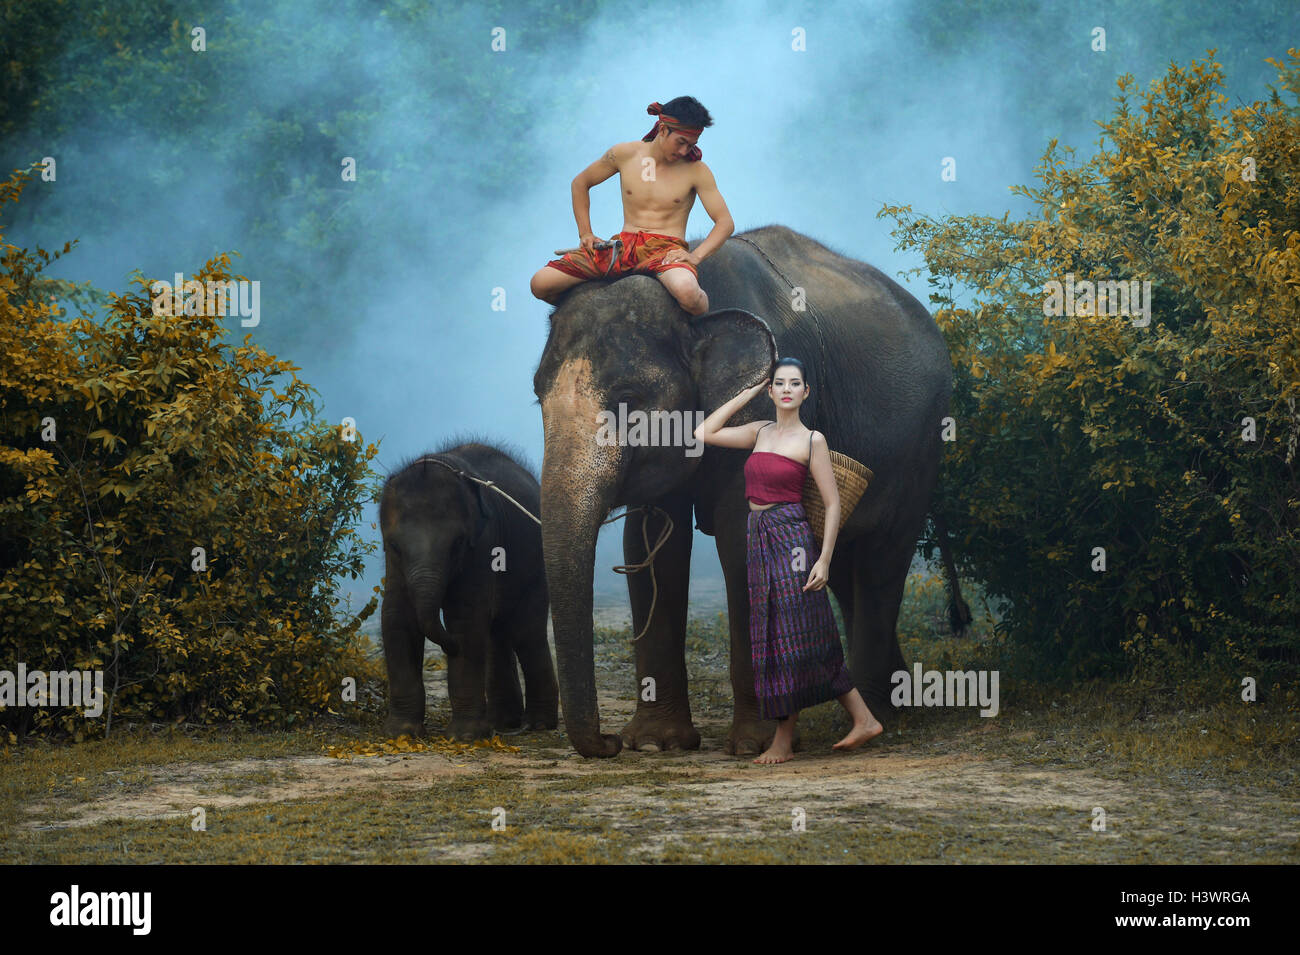 Mahout man sitting on an elephant standing next to woman and elephant calf, Thailand Stock Photo